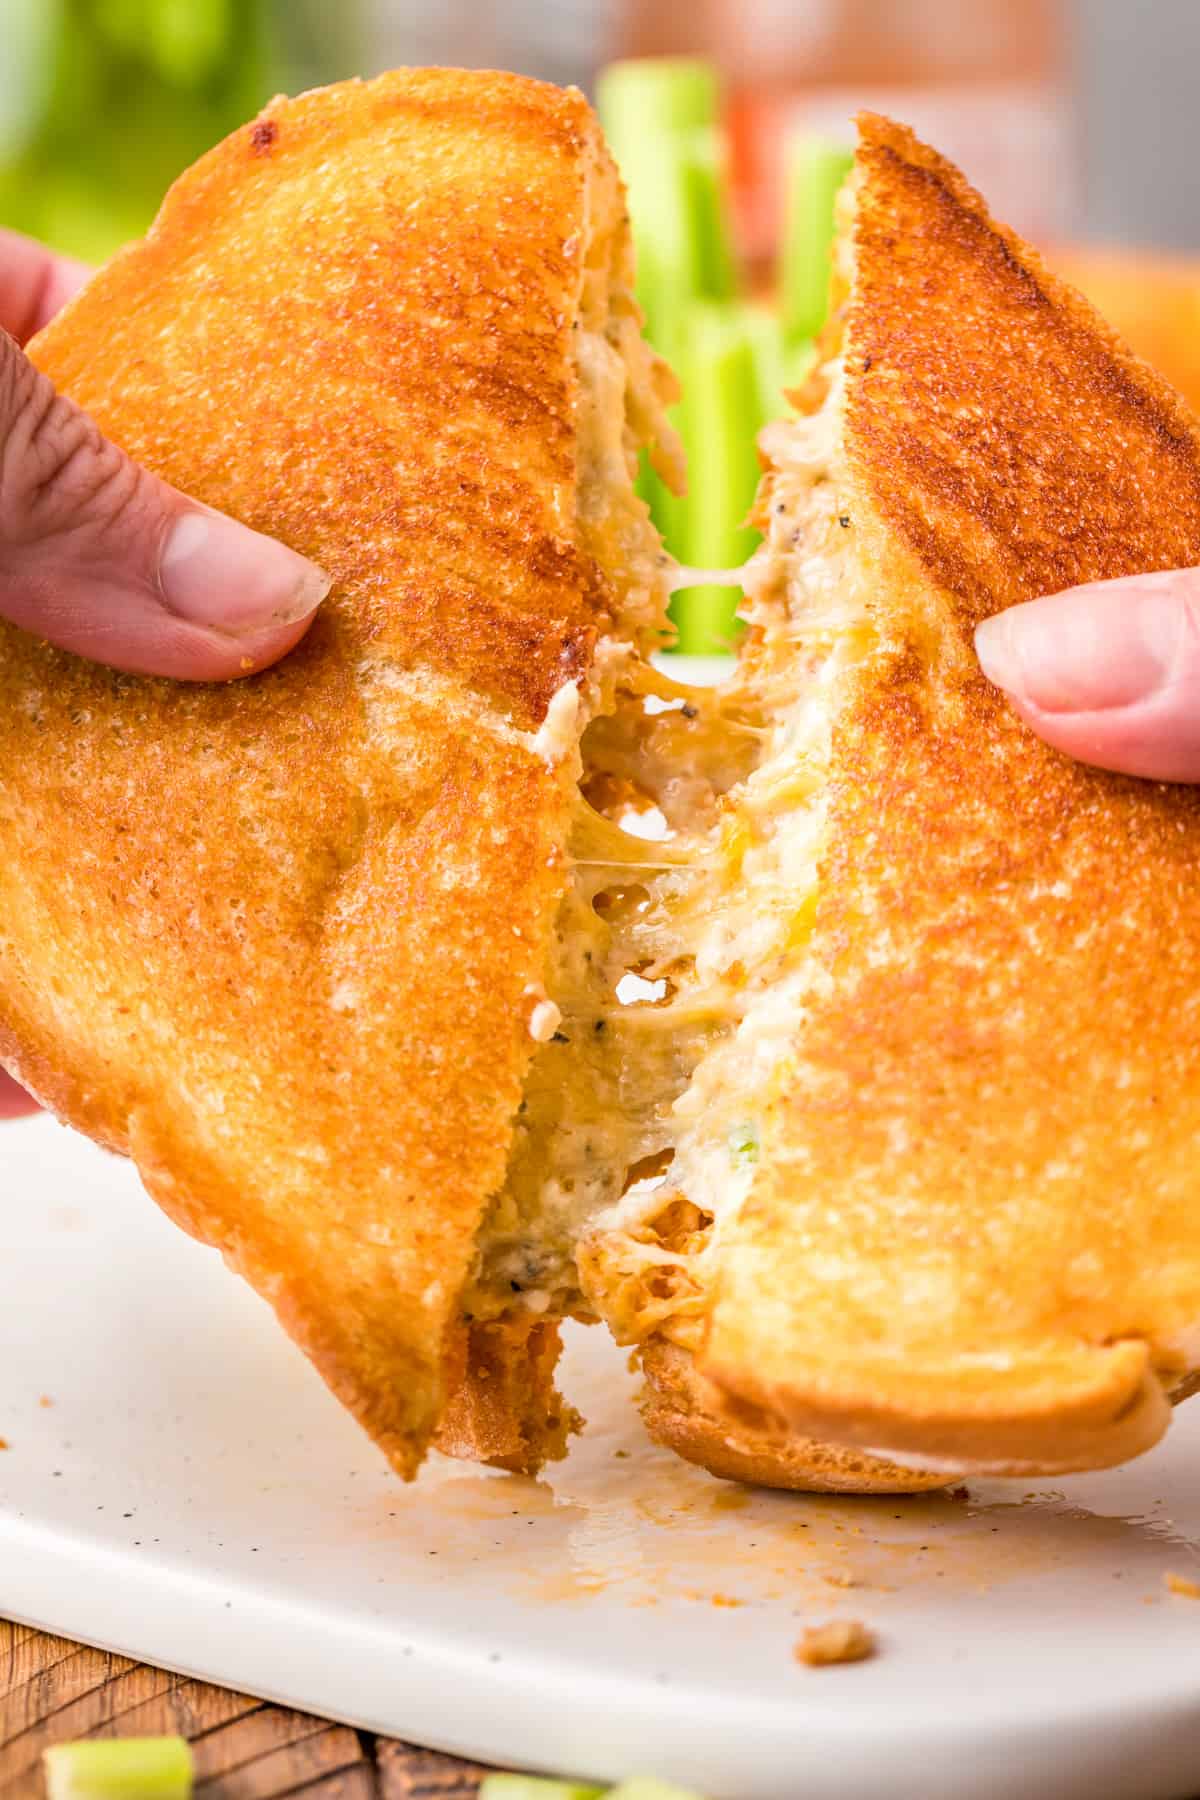 Hands pulling the Buffalo Chicken Grilled Cheese apart showing a slight cheese pull.